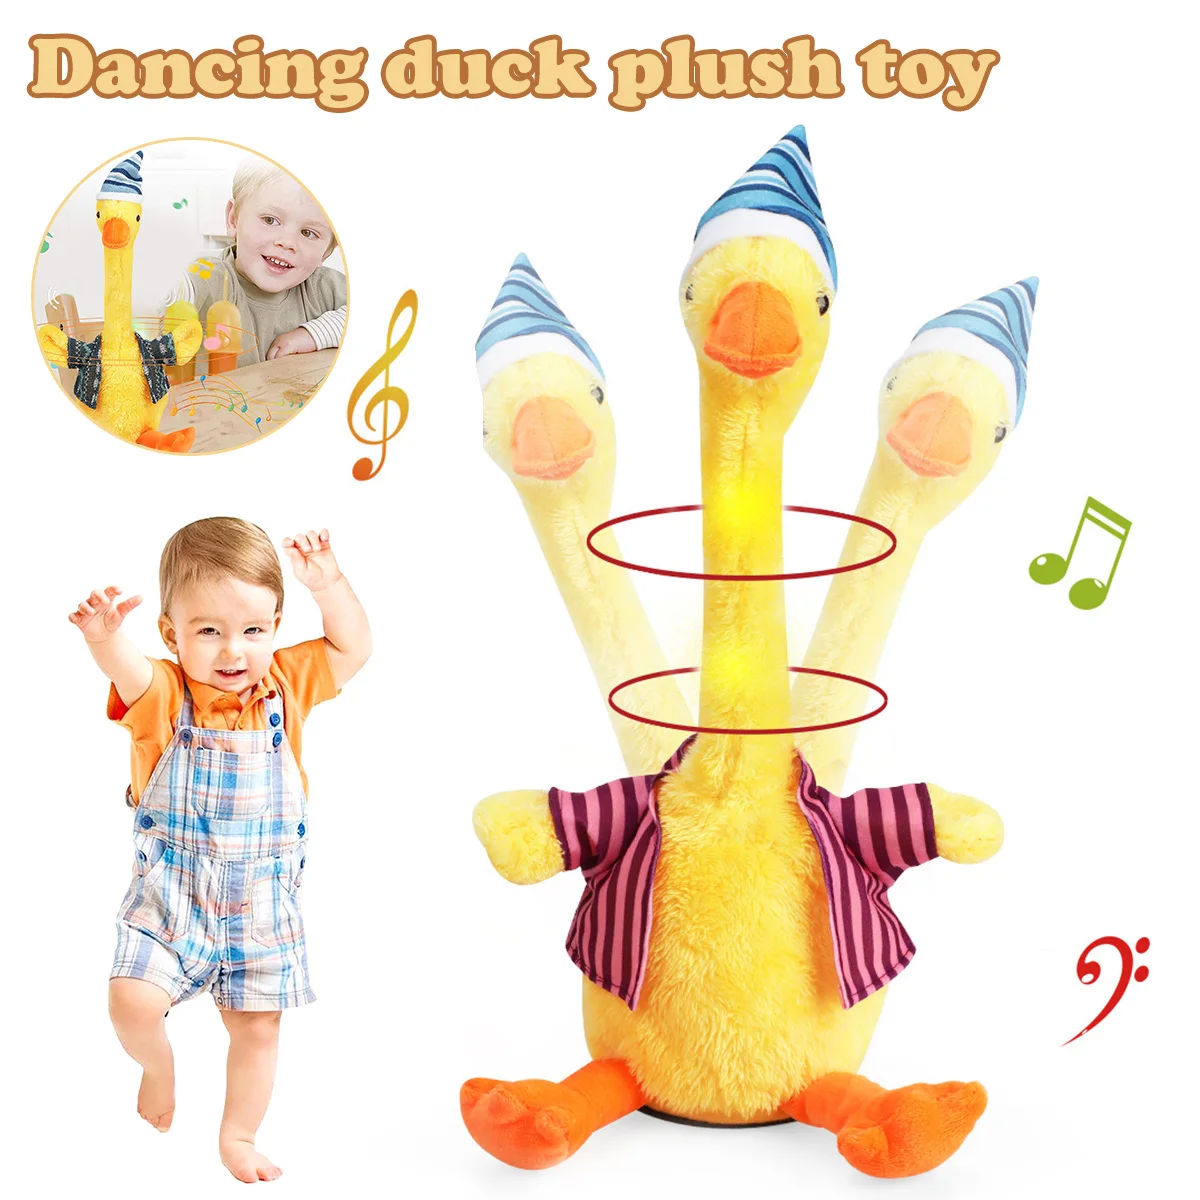 

For Kids Holidays Gift Dancing Plush Toy Singing/Dancing/Record/Replay/Speaking Duck Toy Glow in Dark Duck Toy Home Decoration